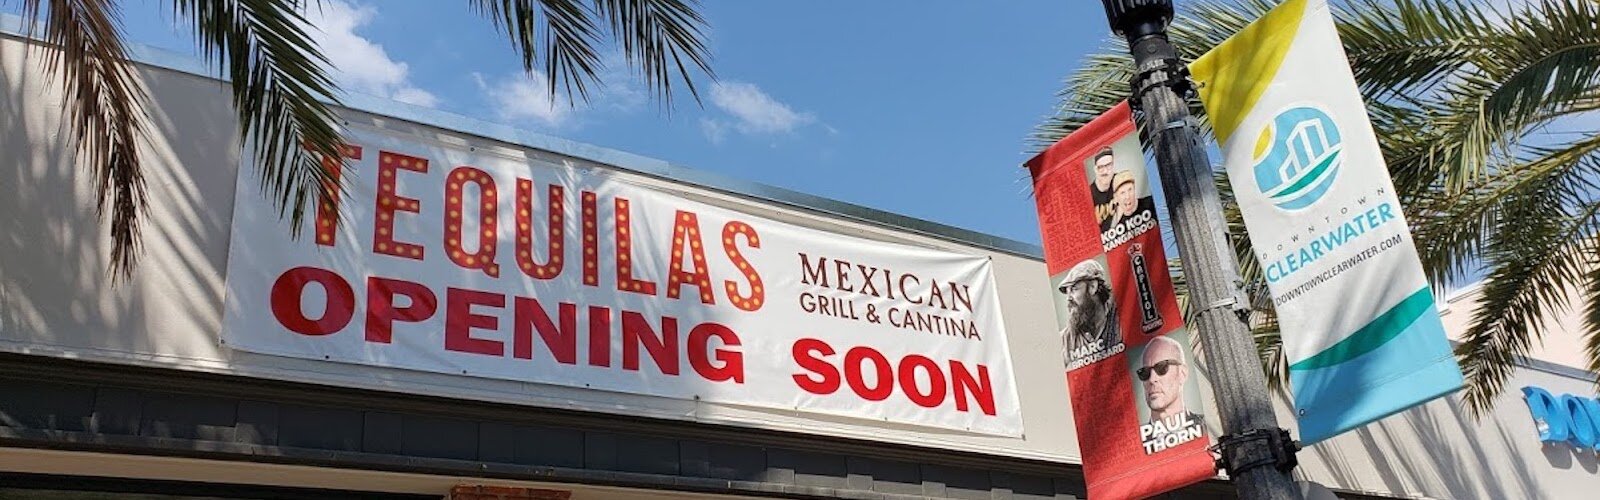 Tequila's Mexican Grill and Cantina is now open in downtown Clearwater.